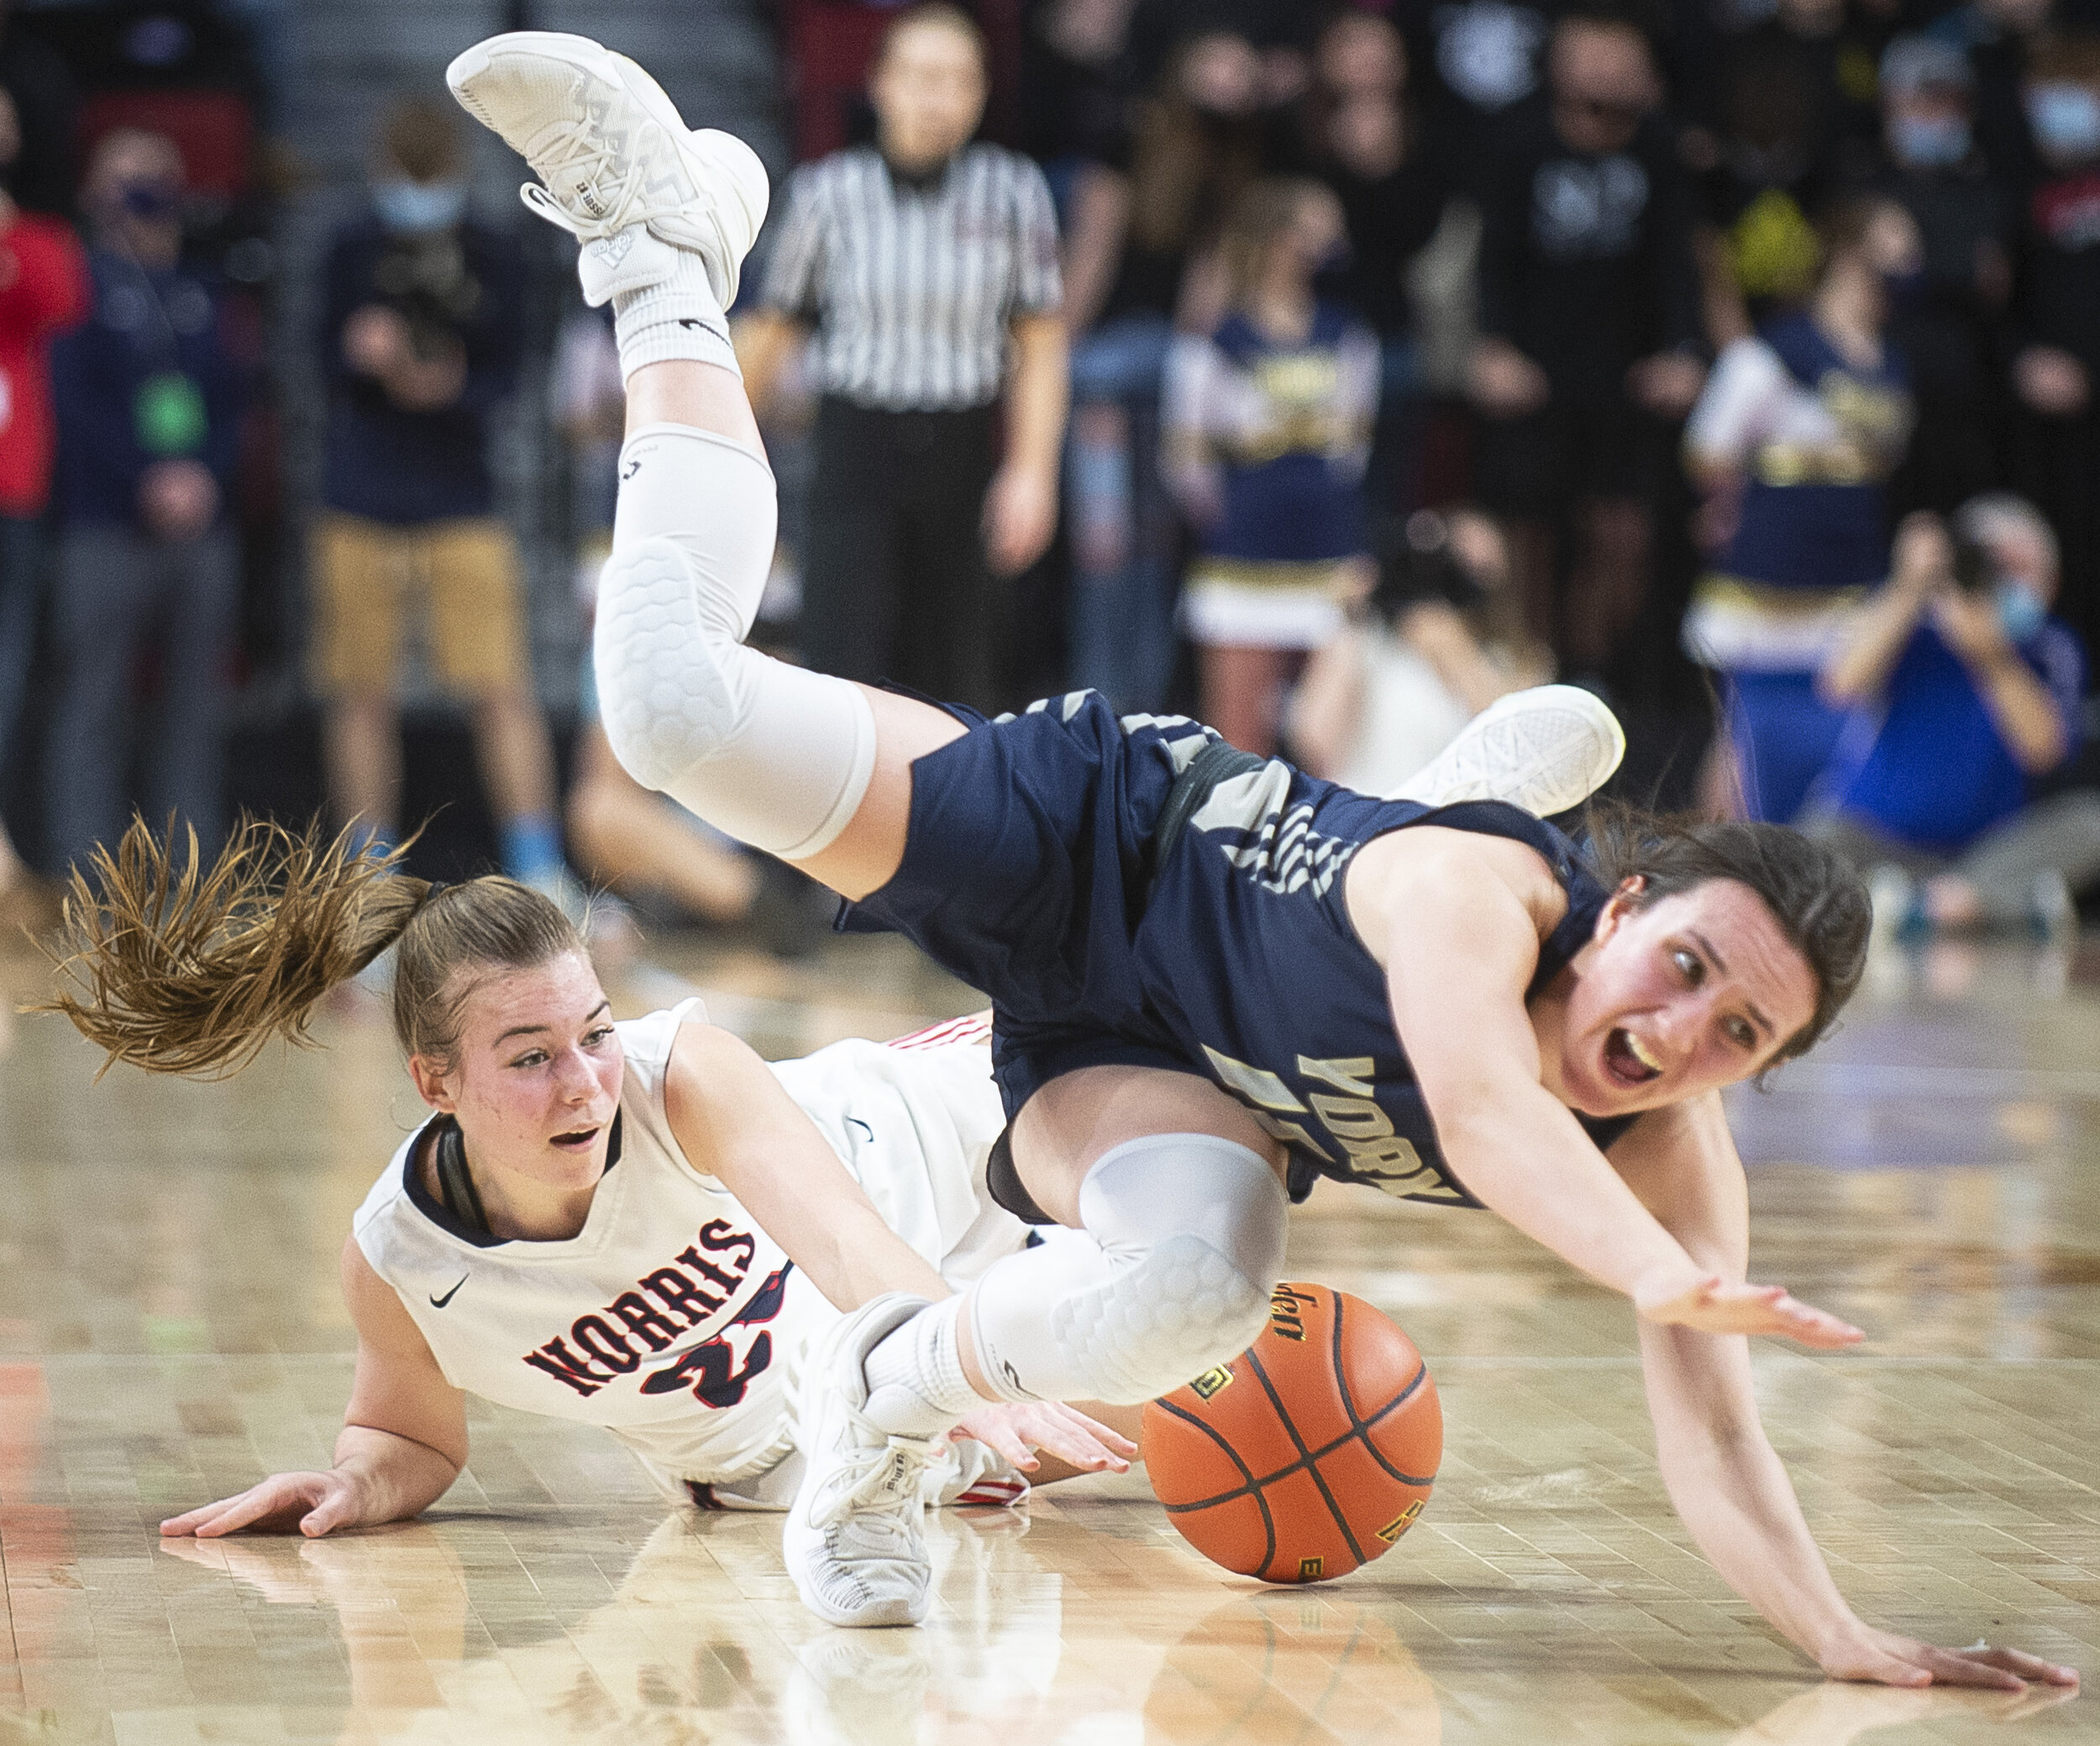  Norris' Maddy Collier (left) collides with York's Destiny Shepherd, sending her tumbling to the floor while diving after a loose ball in the third quarter during a class B semifinal match on Friday, March 05, 2021, at Pinnacle Bank Arena. KENNETH FE